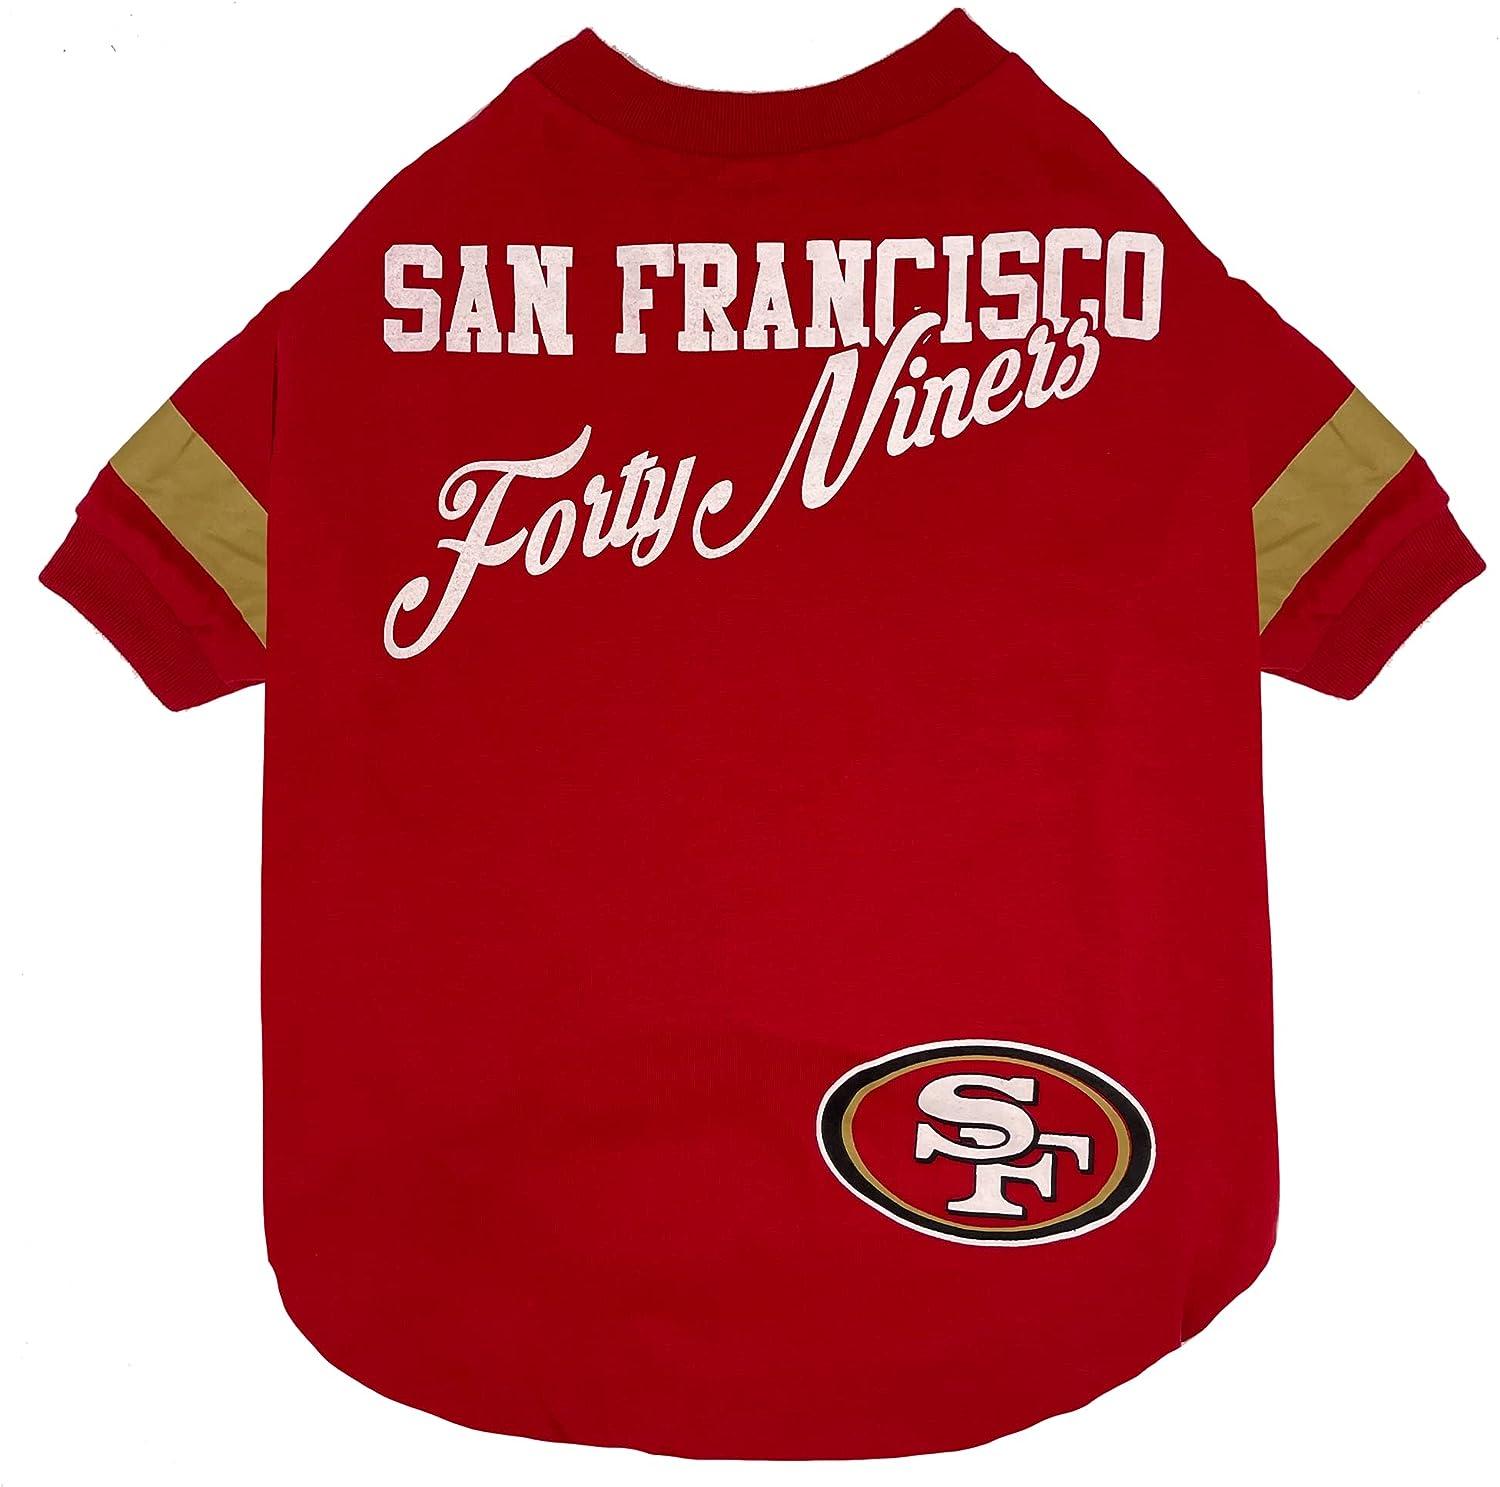 NFL SAN Francisco 49ERS Hoodie for Dogs & Cats., NFL Football Licensed Dog  Hoody Tee Shirt, Medium, Sports Hoody T-Shirt for Pets